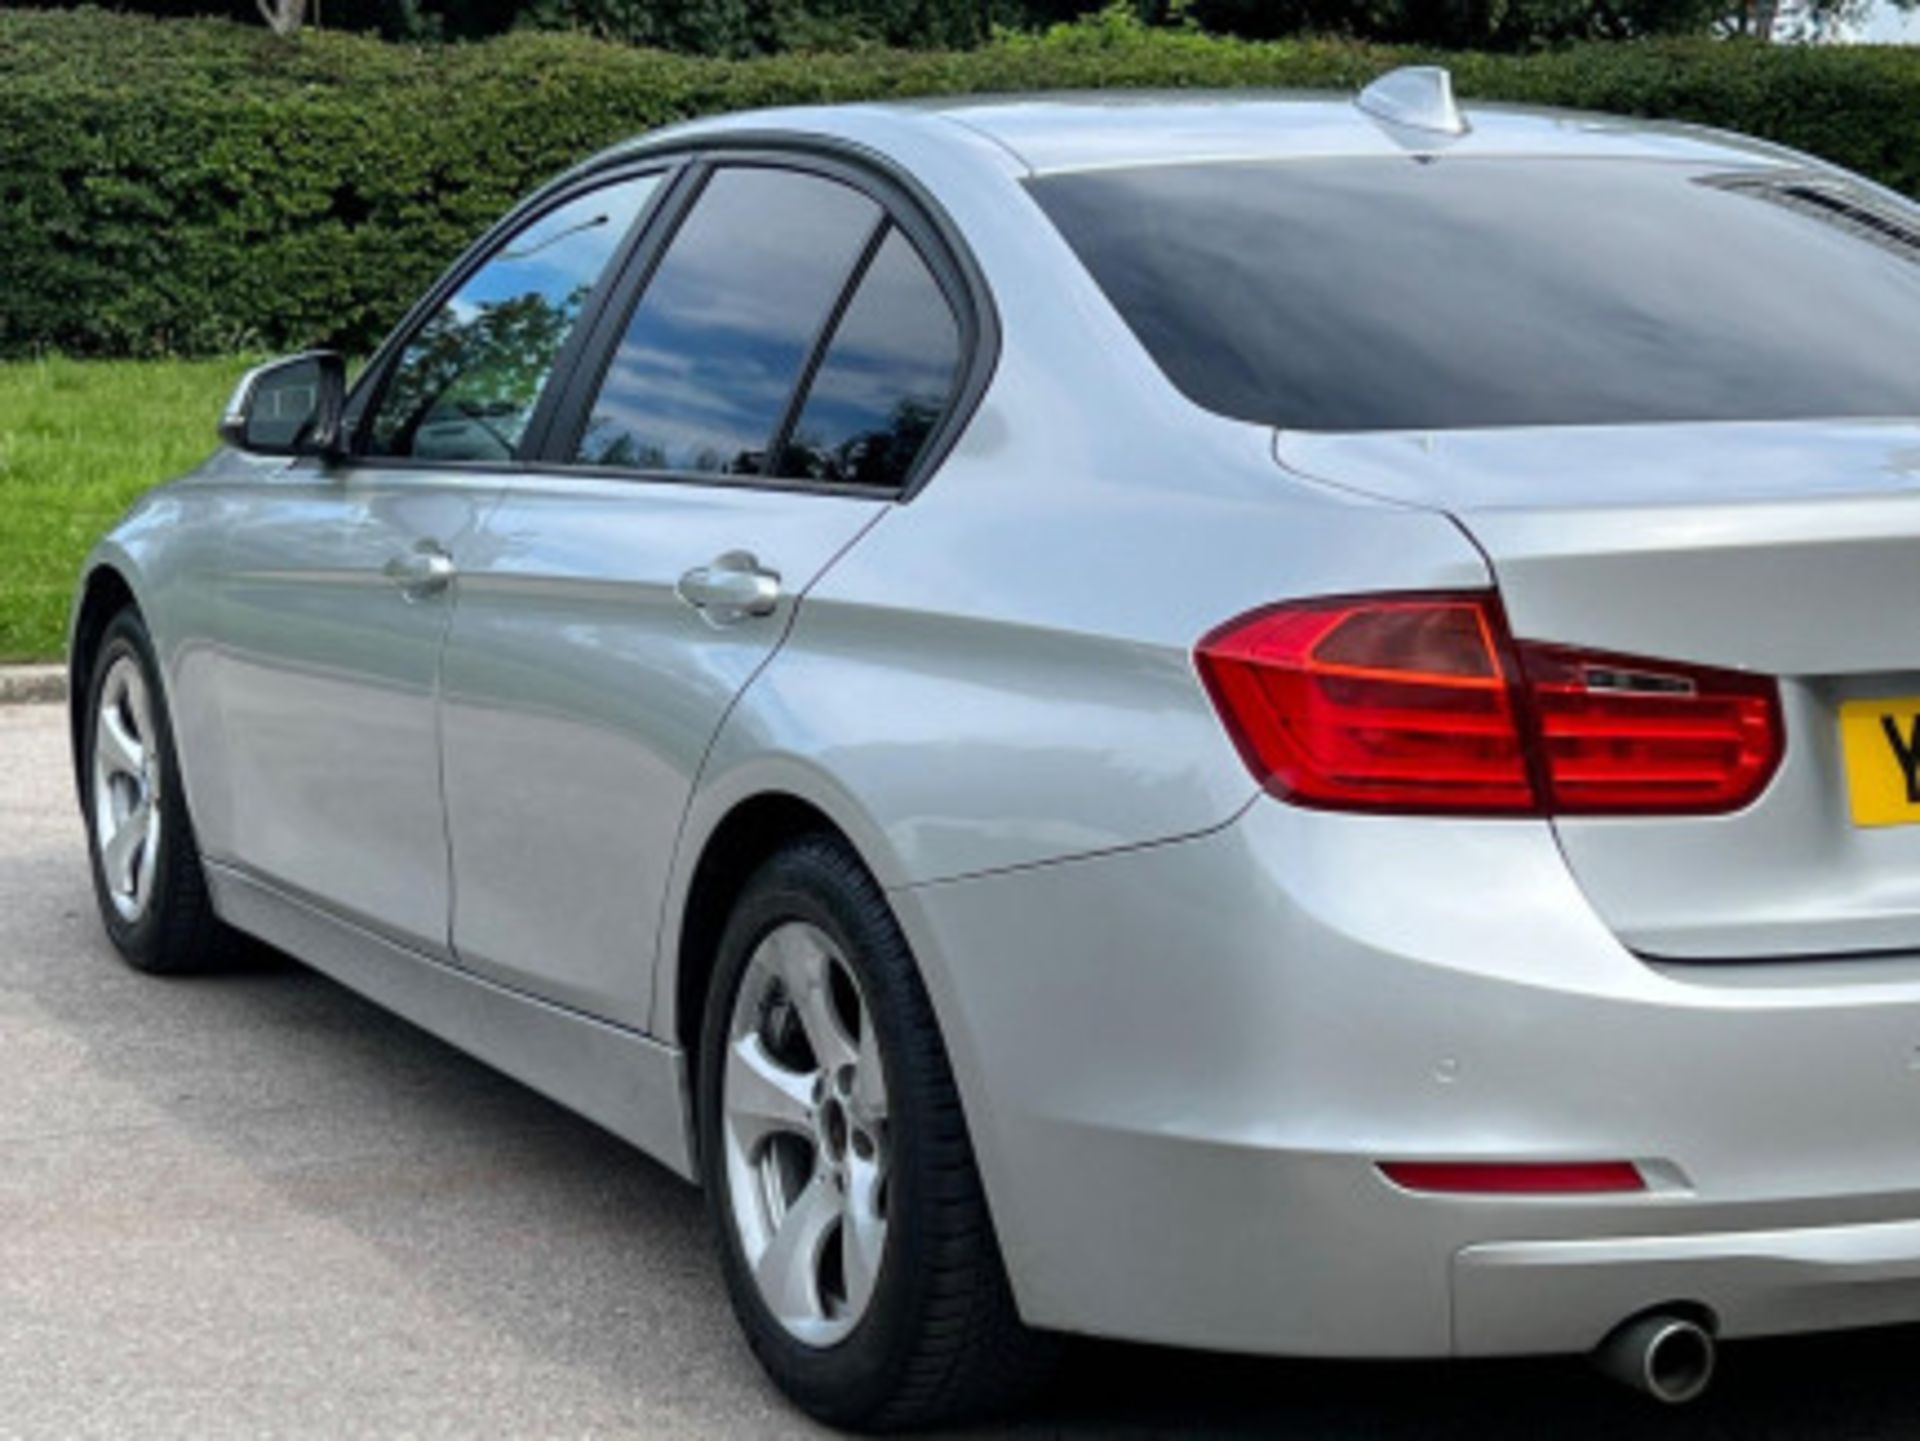 BMW 3 SERIES 2.0 DIESEL ED START STOP - A WELL-MAINTAINED GEM >>--NO VAT ON HAMMER--<< - Image 107 of 229